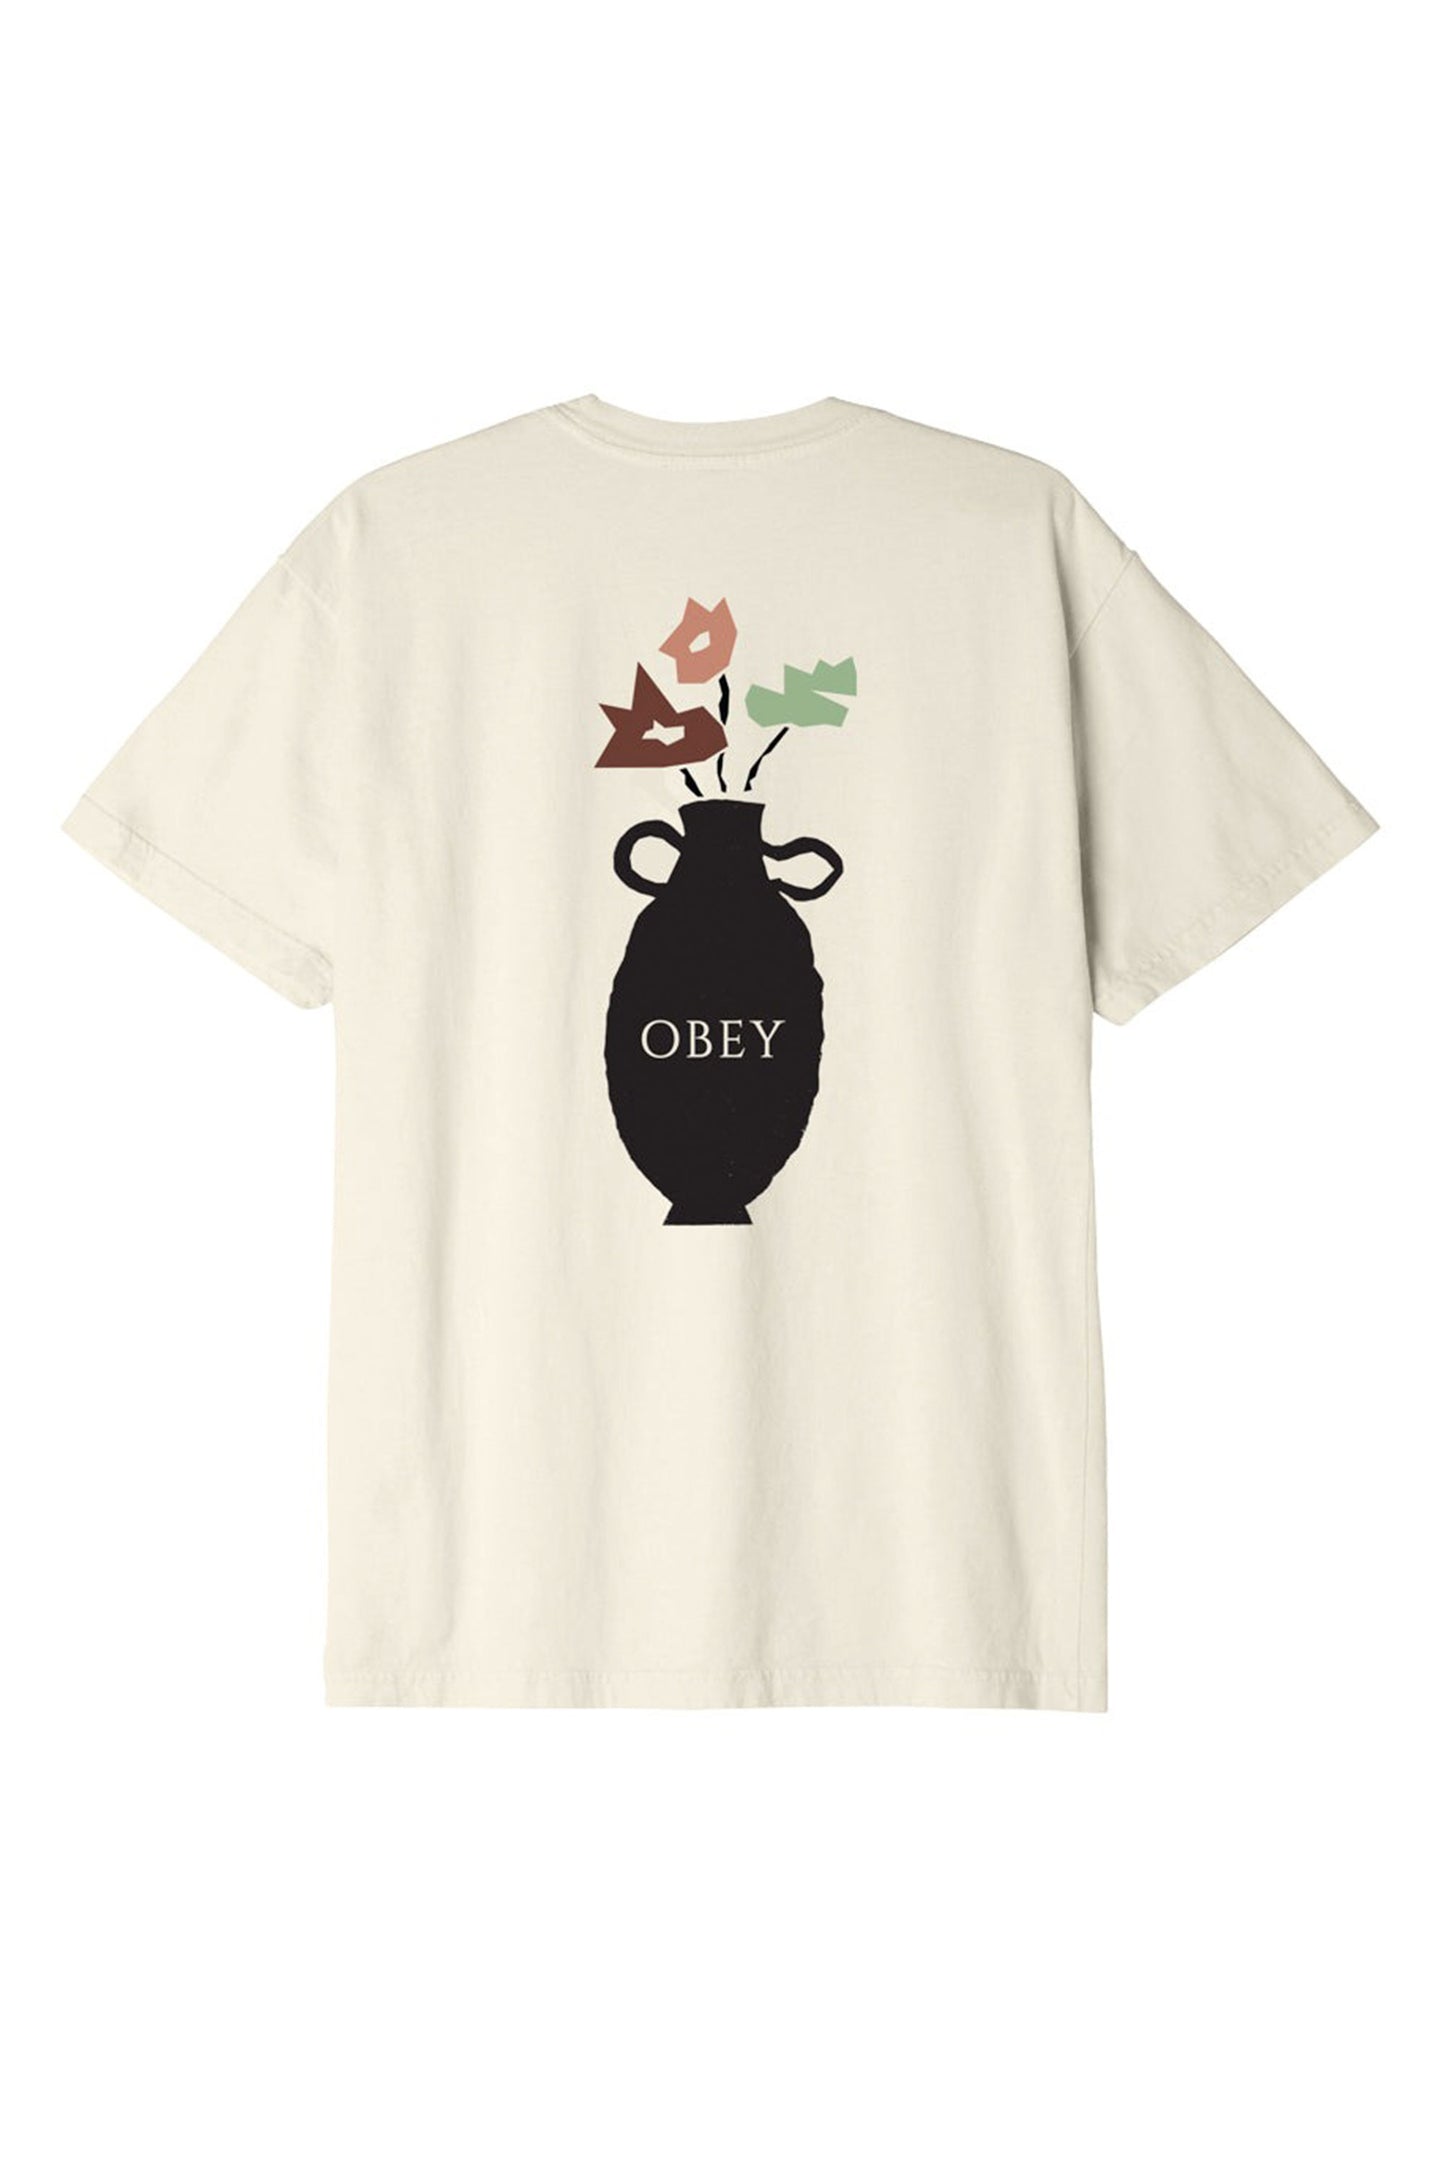 Pukas-Surf-Shop-Obey-Tee-obey-vasey